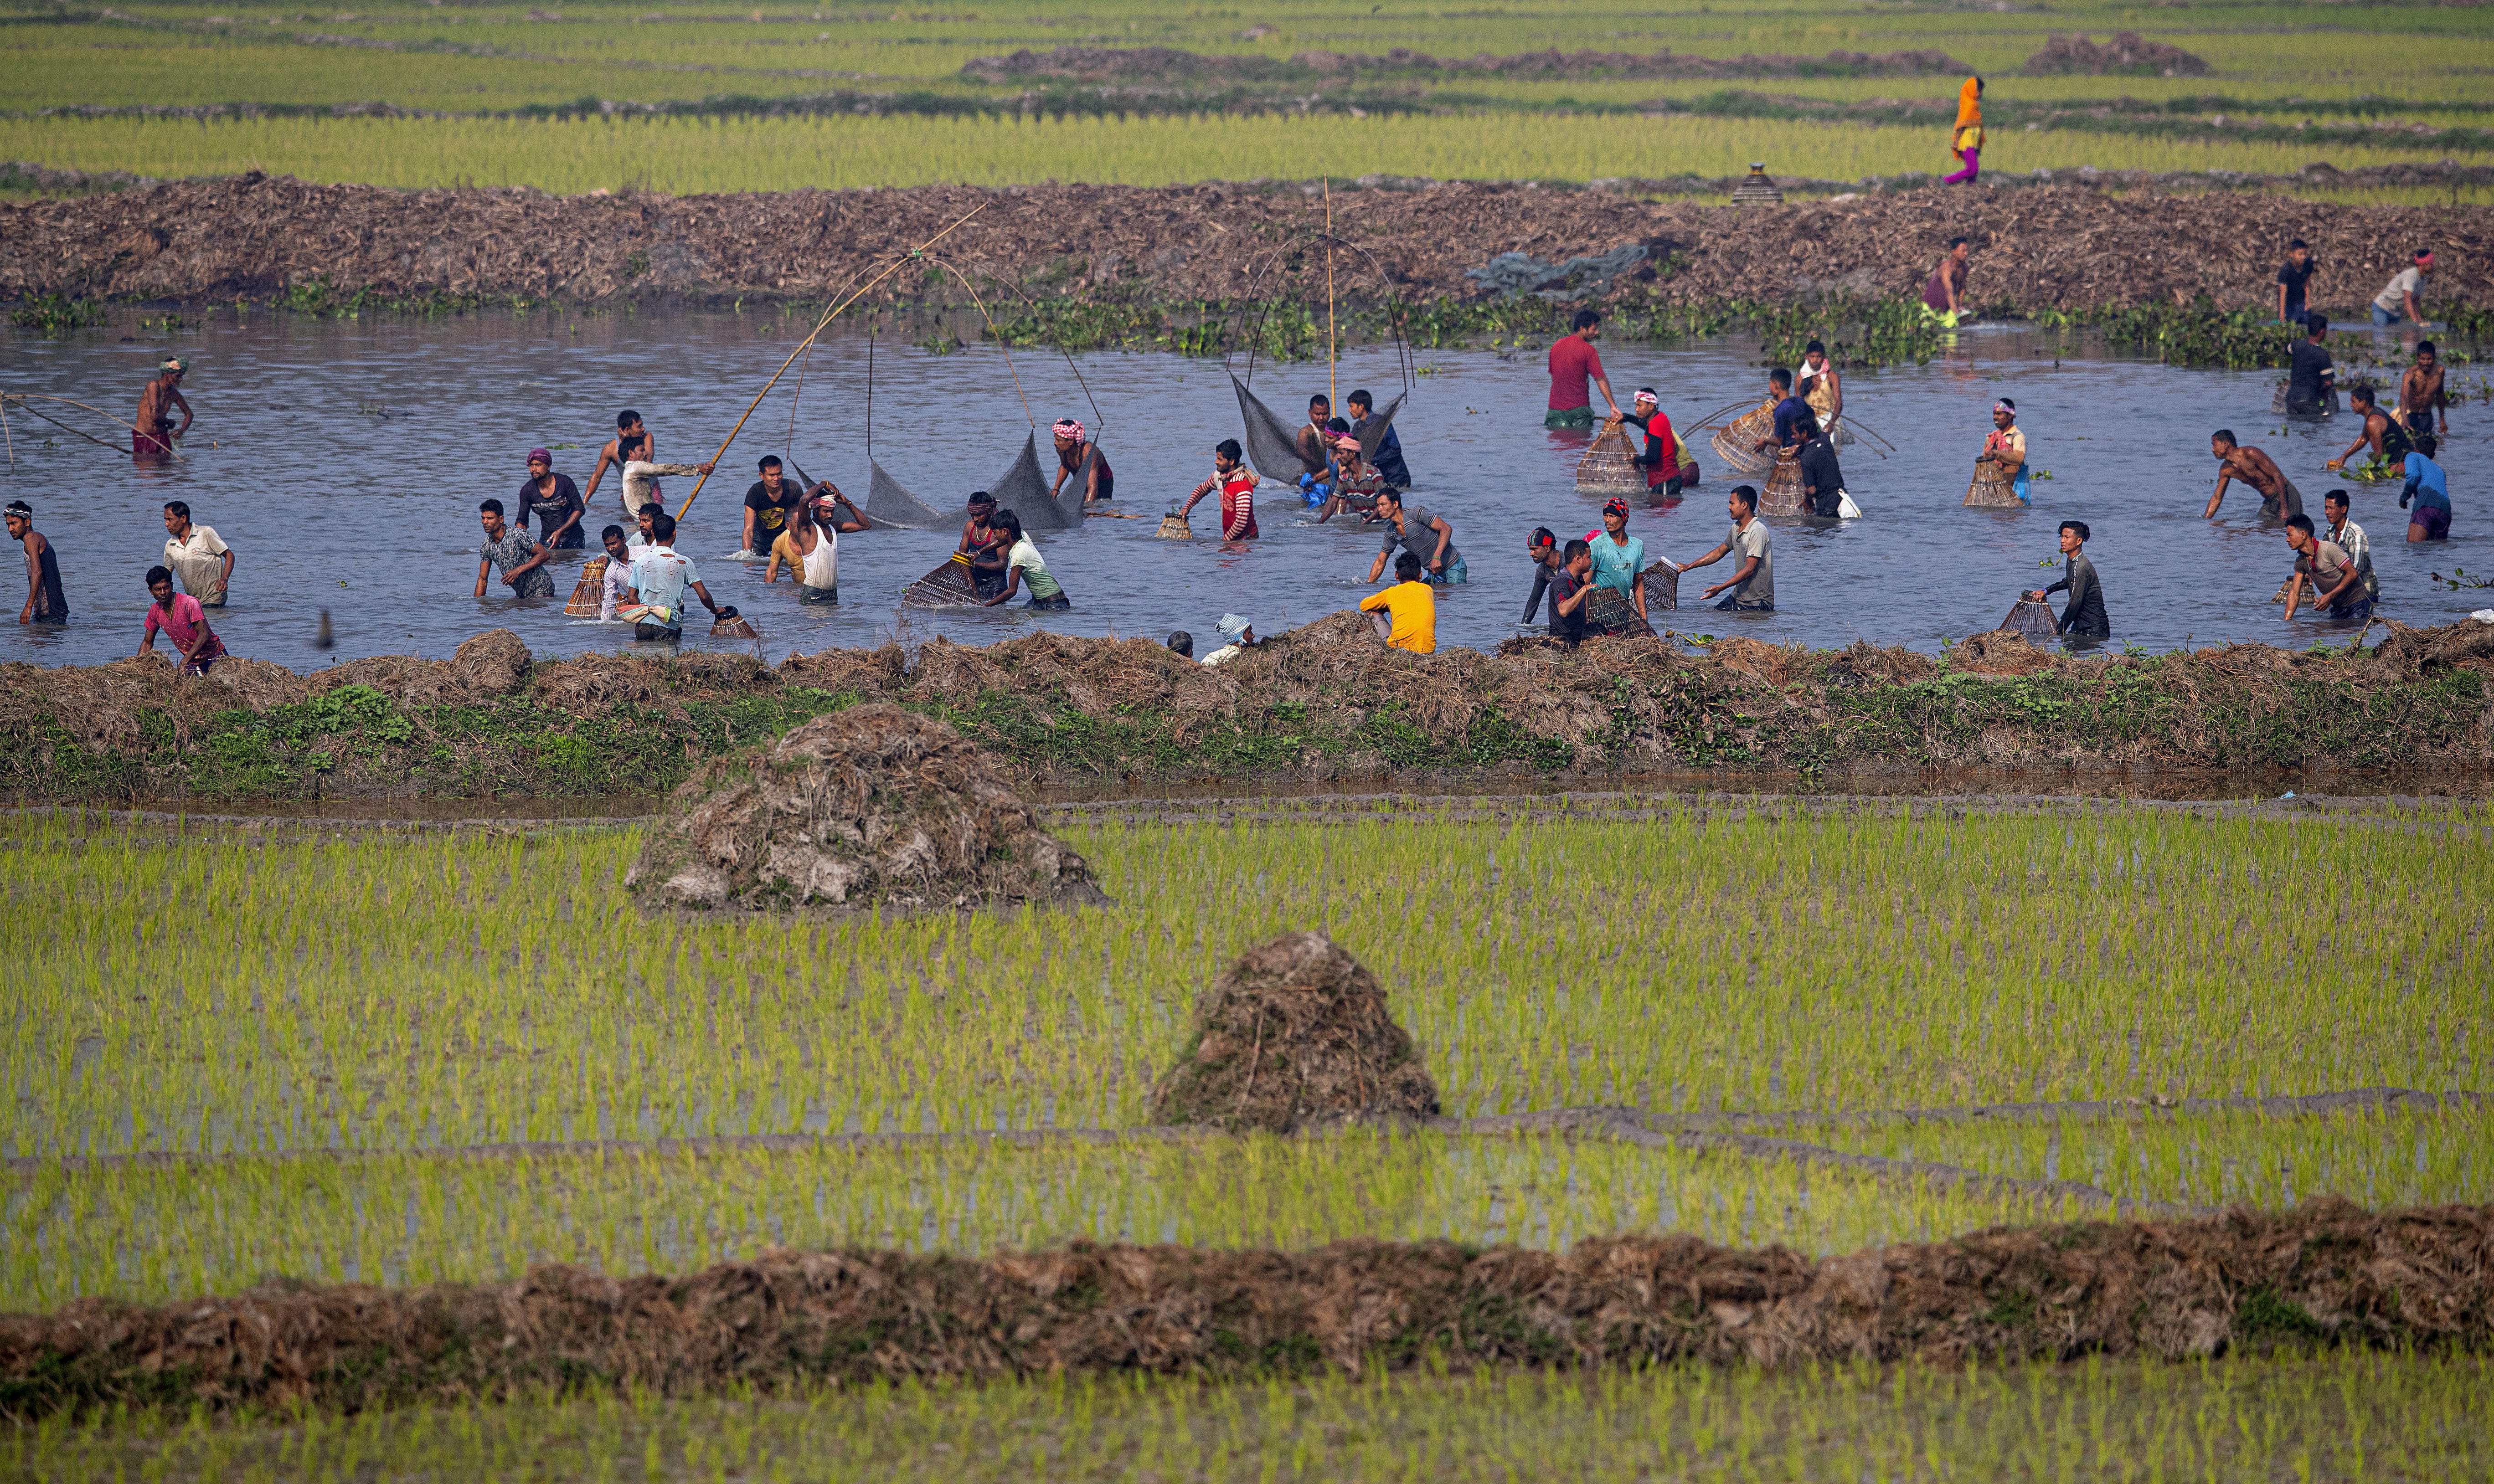 Tribal people participate in community fishing during Jonbeel festival near Jagiroad, about 75 kilometers (47 miles) east of Gauhati, India, Friday, Jan. 17, 2020. Tribal communities like Tiwa, Karbi, Khasi, and Jaintia from nearby hills participate in large numbers in this festival, that signifies harmony and brotherhood amongst various tribes and communities, and exchange goods through an established barter system. (AP Photo/Anupam Nath)